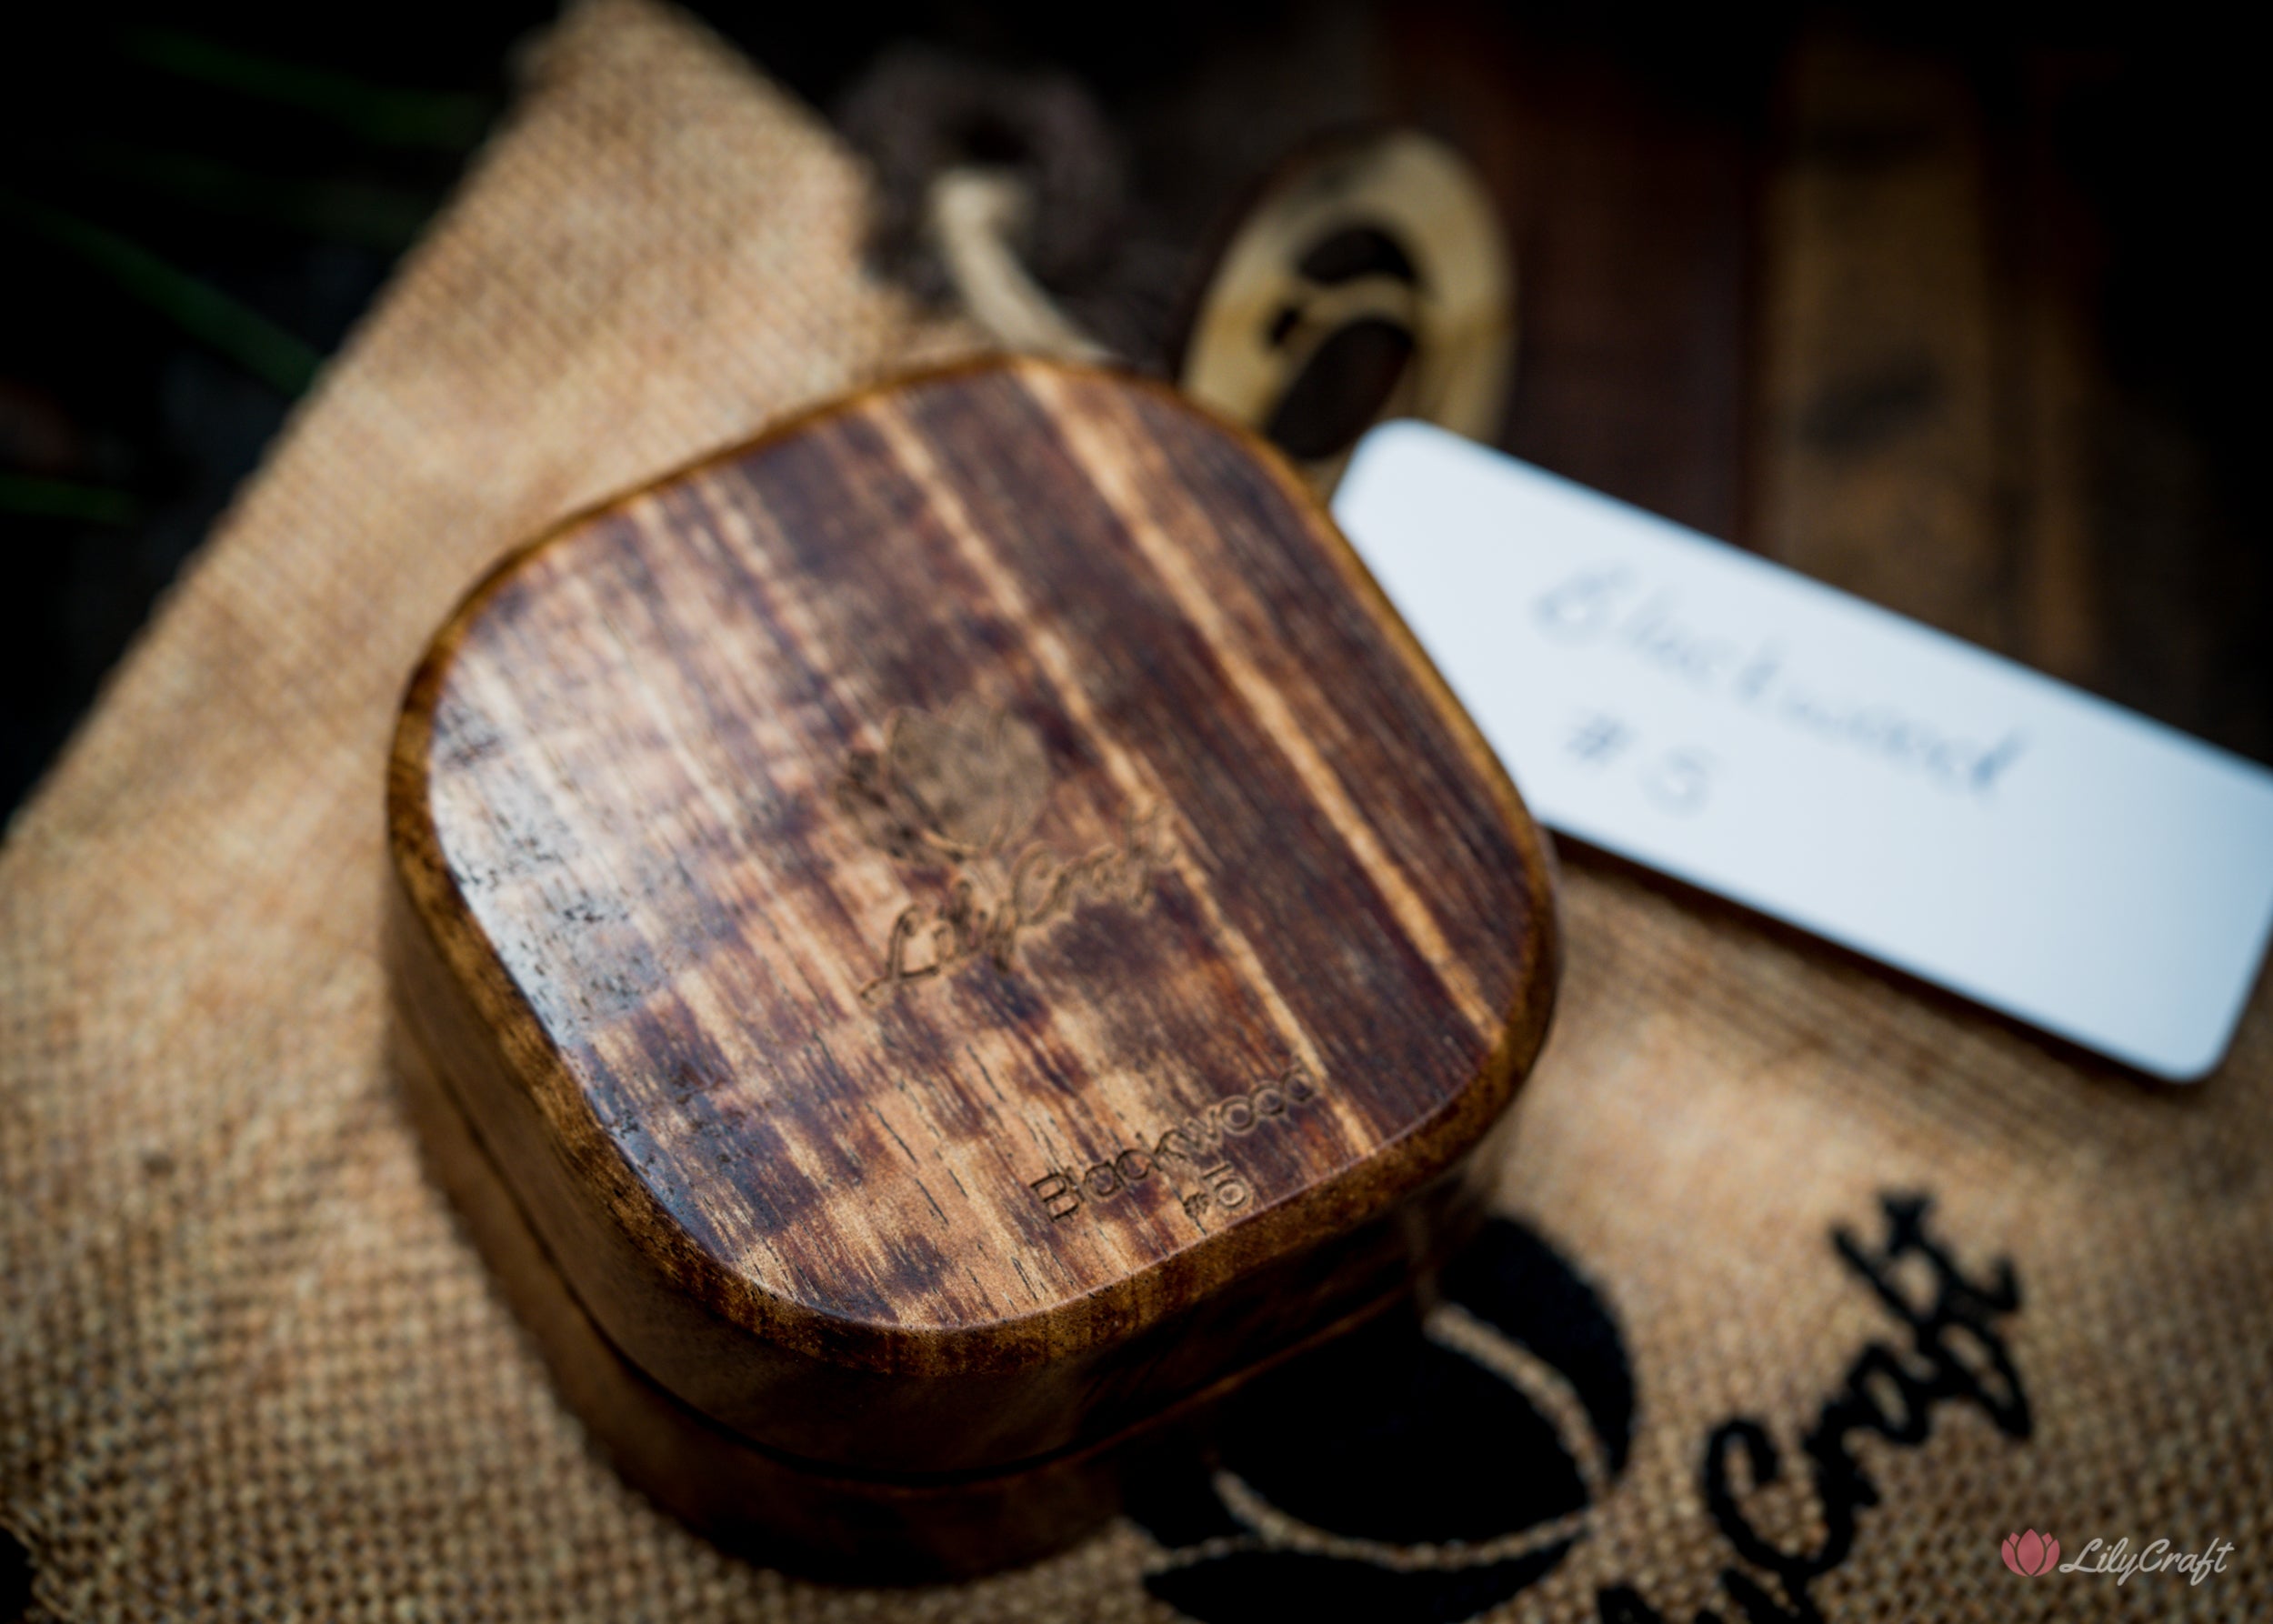 Handmade compass with attention to detail in every aspect.